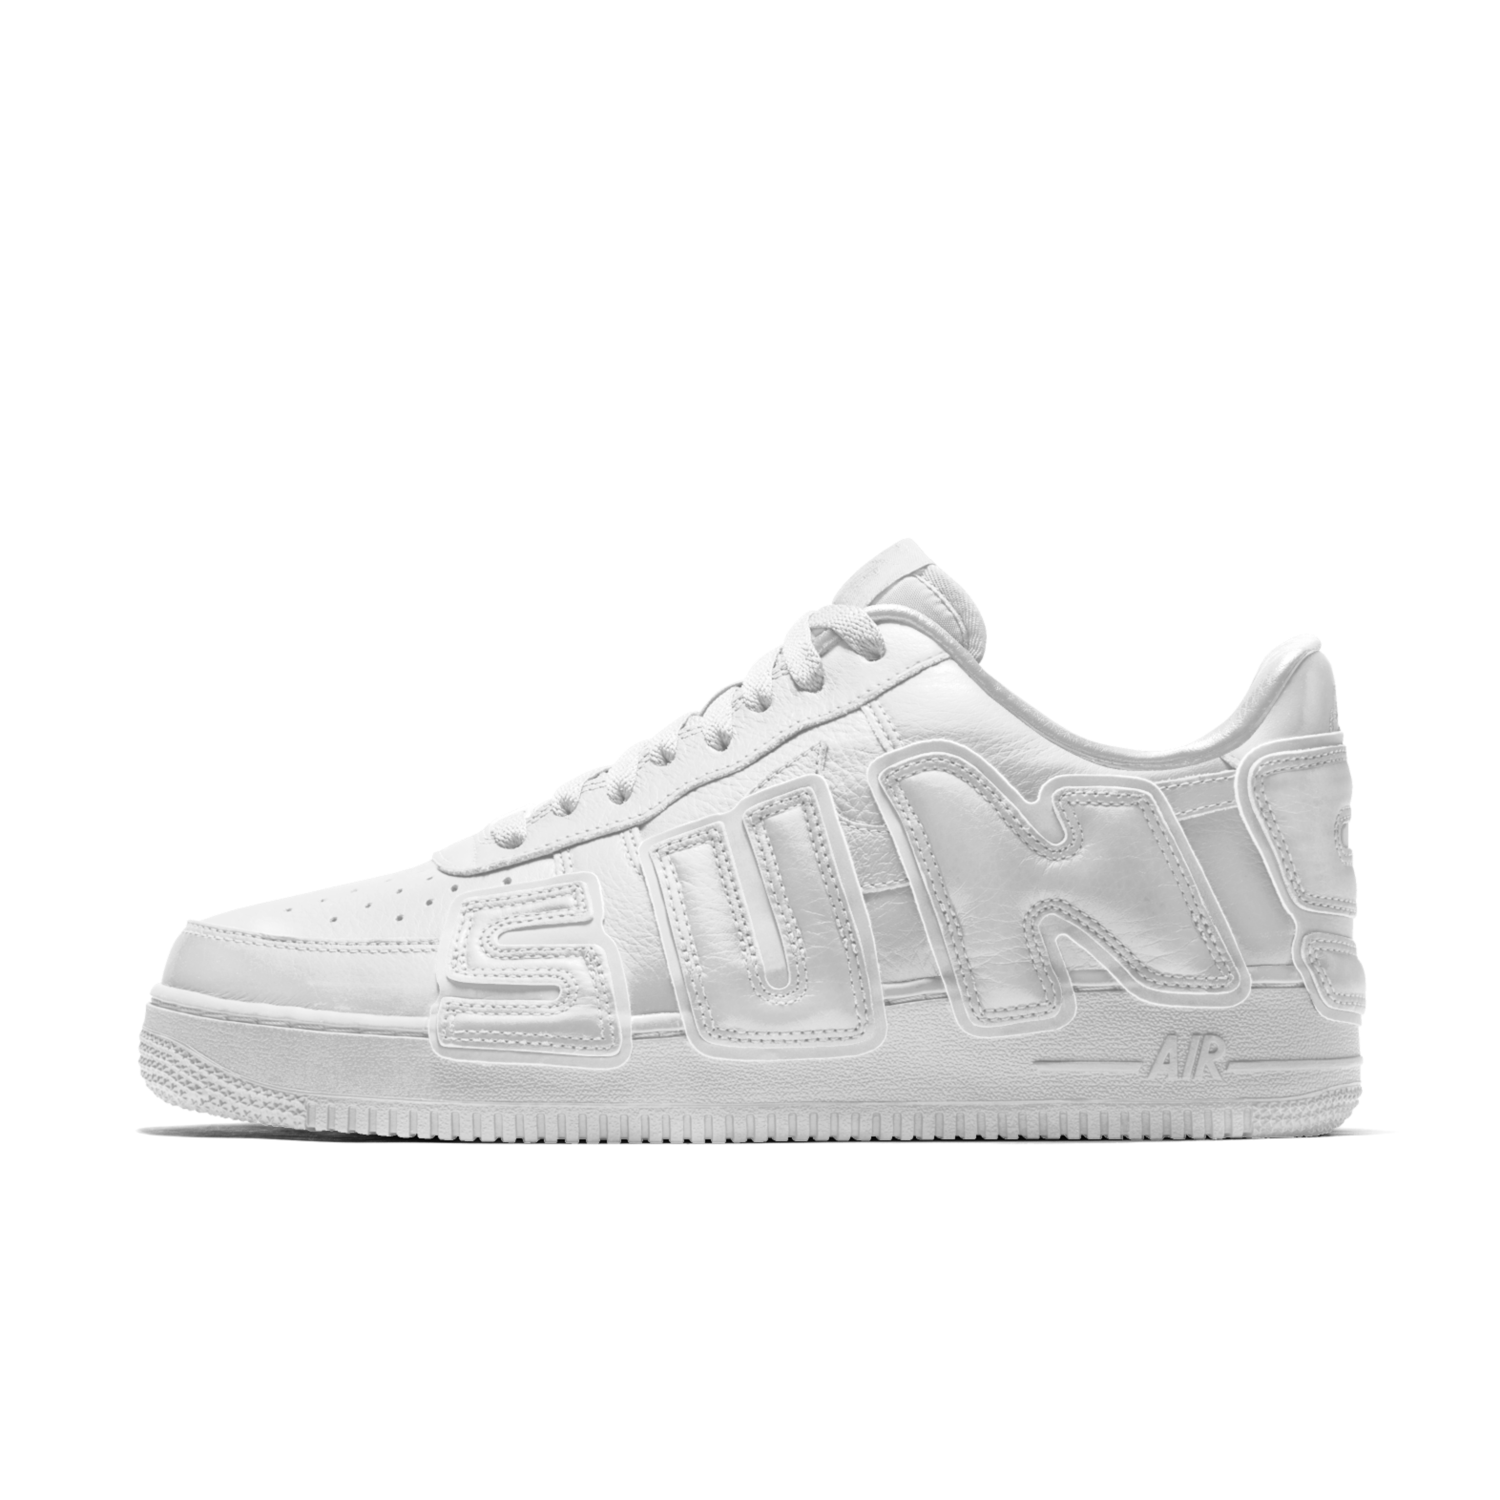 Restock: CPFM x Nike Air Force 1 By You 